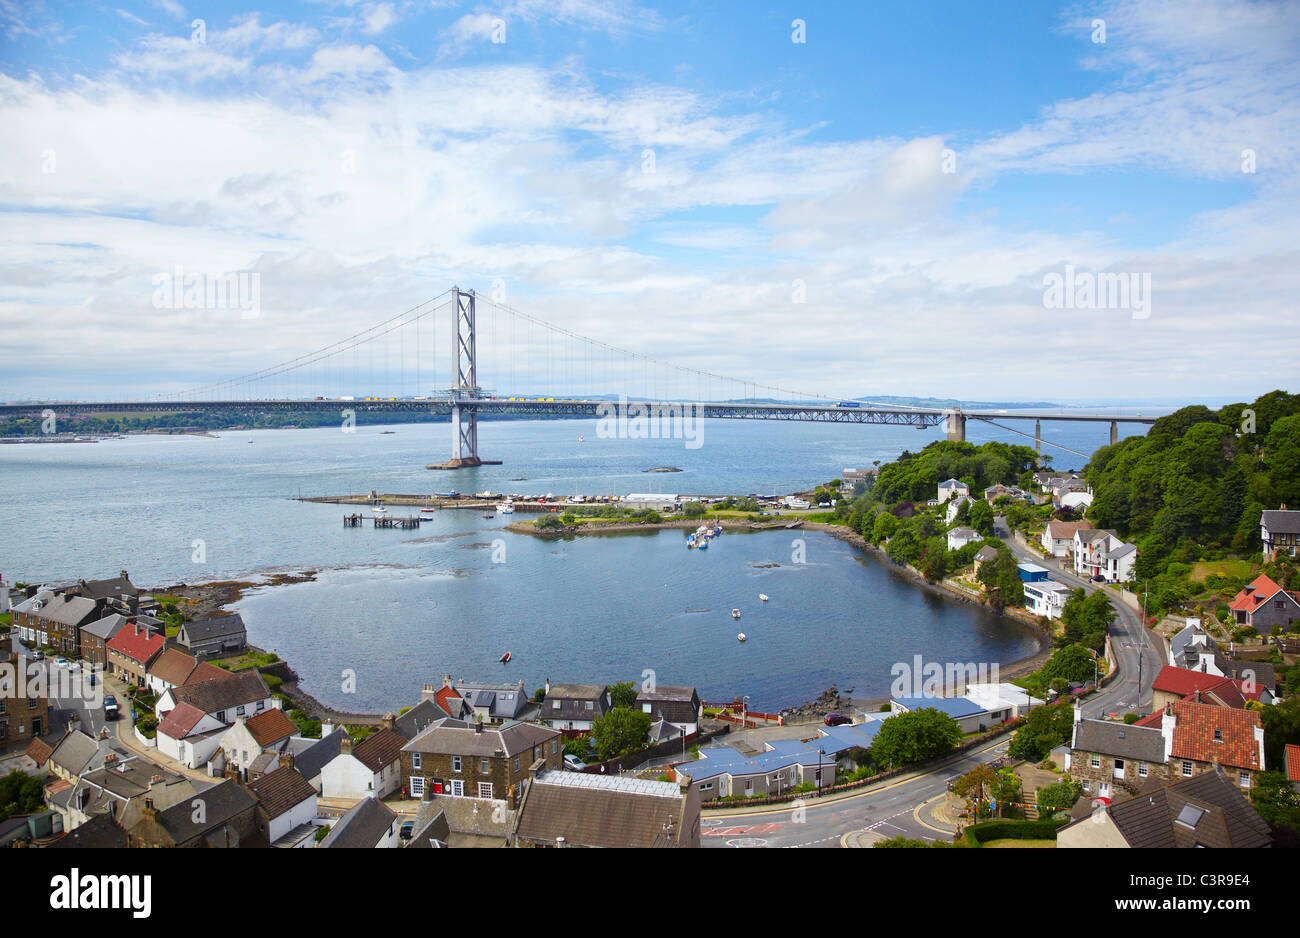 Forth Road Bridge, Scotland, connecting the Edinburgh, at South Queensferry, to Fife, at North Queensferry Stock Photo